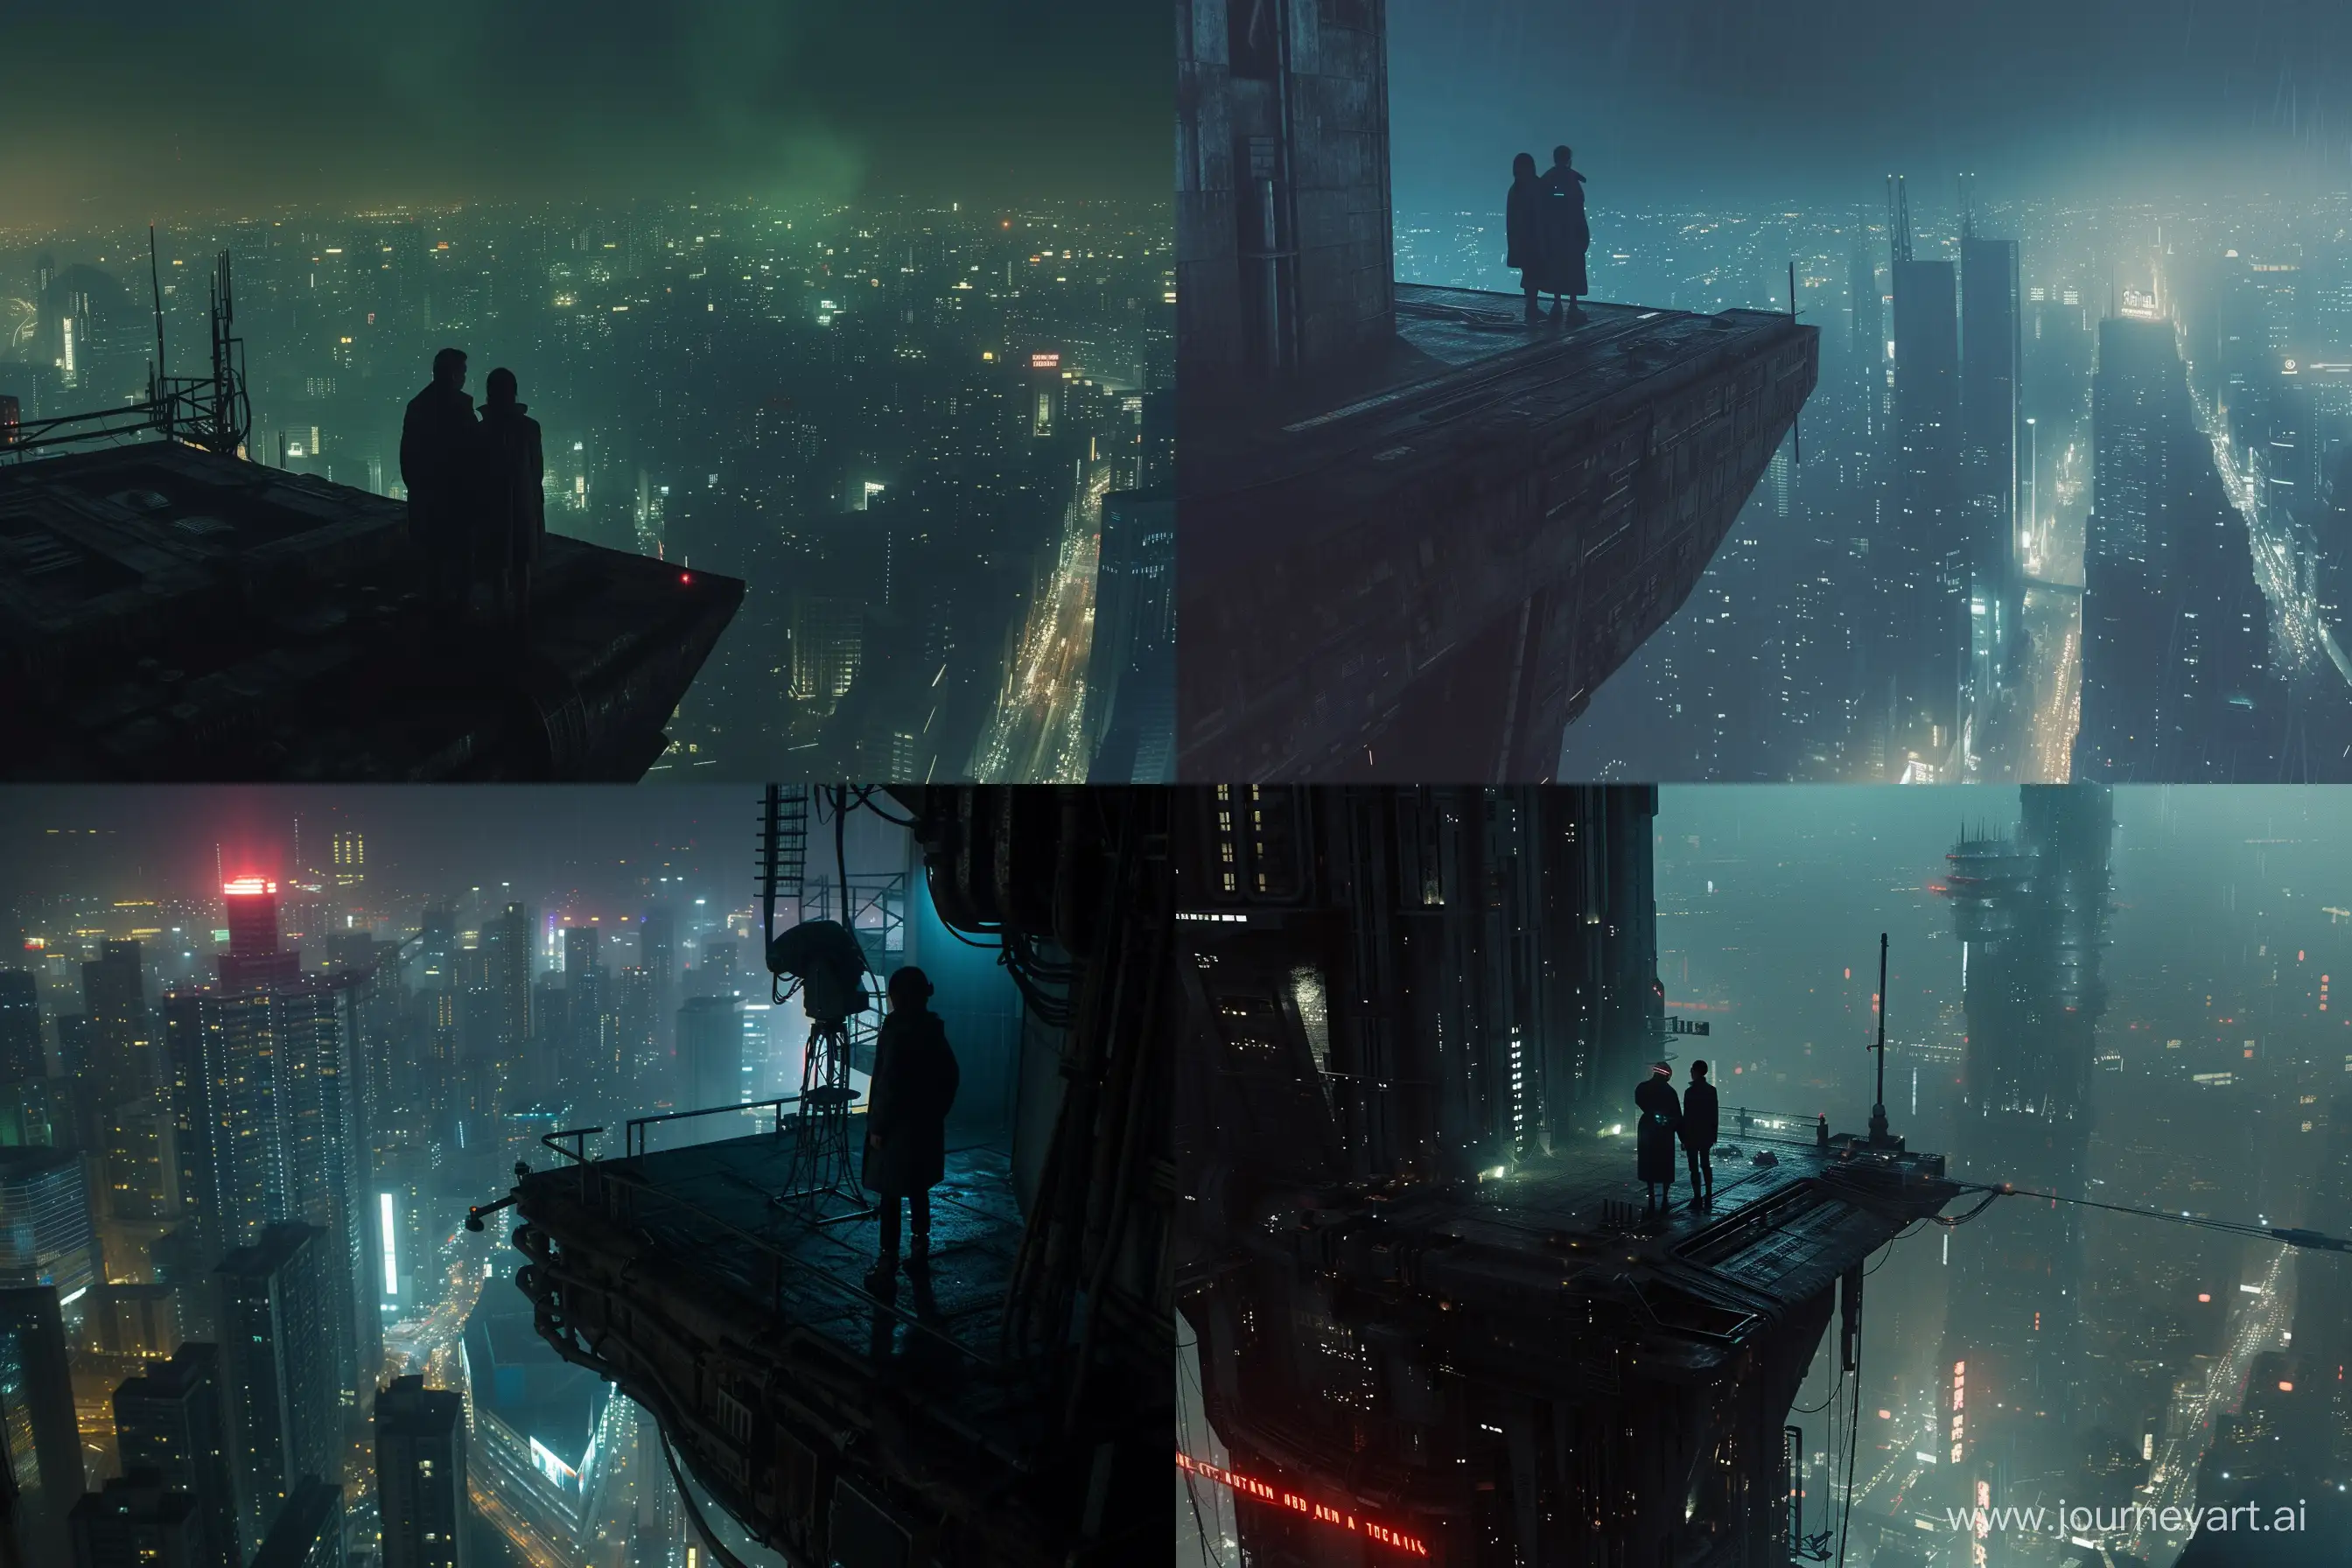 Blade-Runner-2049-Cityscape-Aerial-View-of-Joes-Encounter-with-Ana-de-Arms